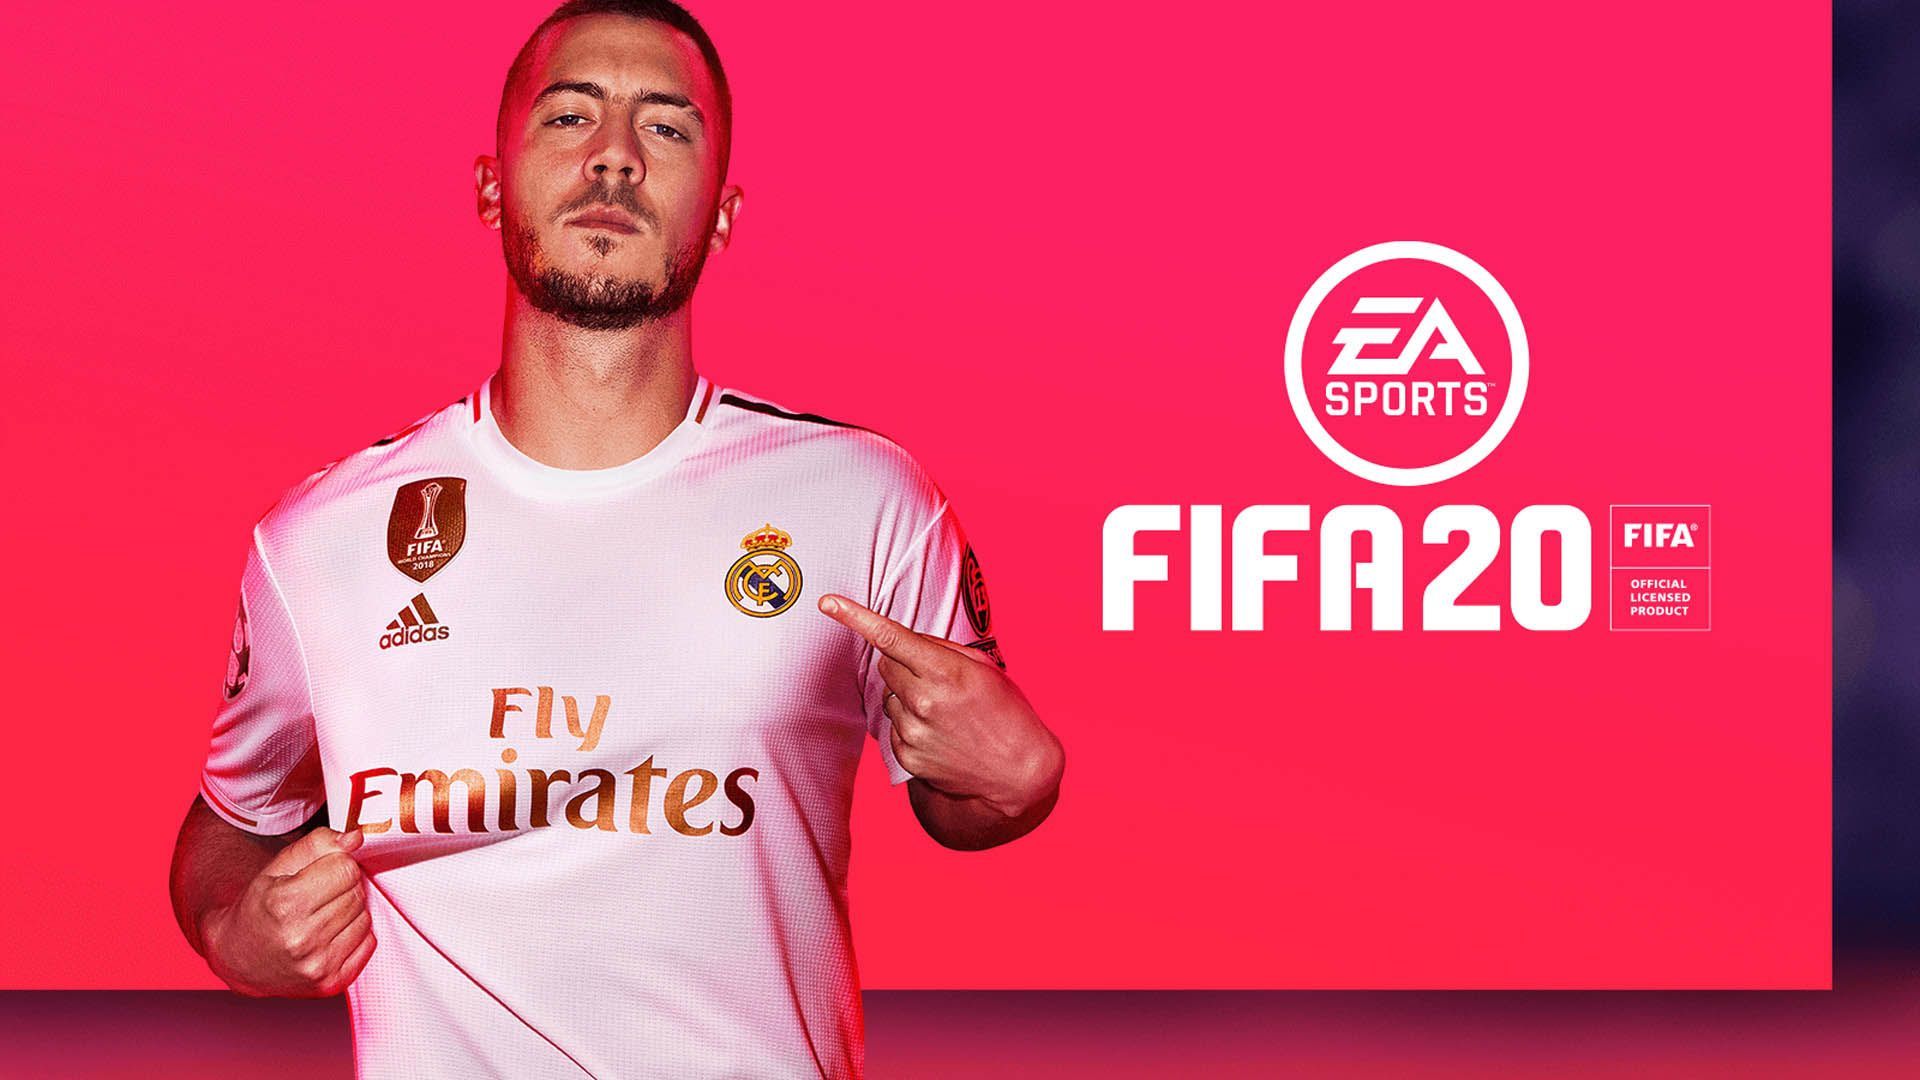 Fifa 2020 Ultimate Team: Discover How to Earn Free Coins with Bronze and Silver Packs